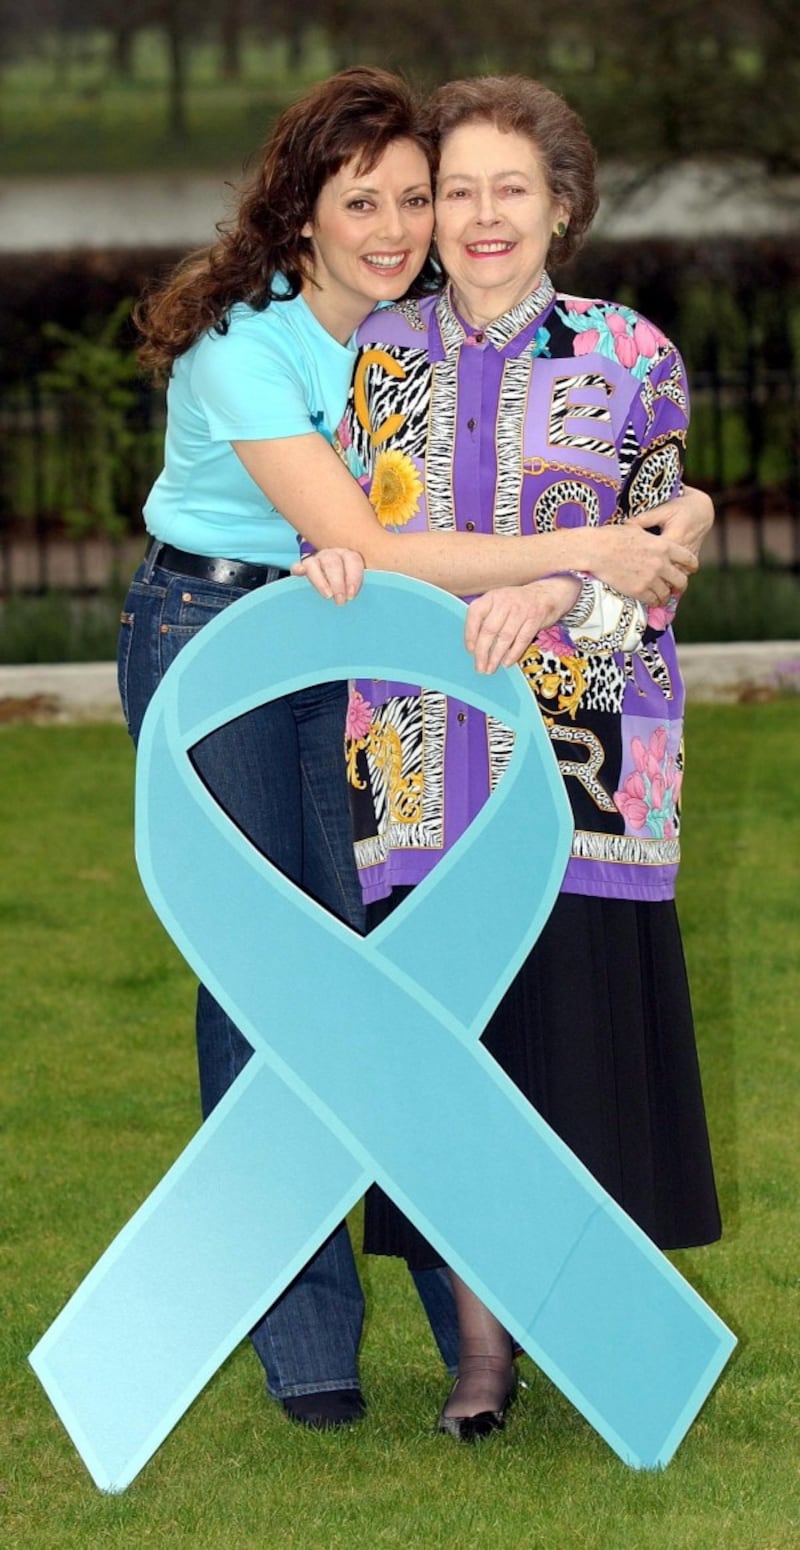 Carol Vorderman and her mother Edwina, who also goes by the name Jean, during a photocall to launch WellBeing's National Ovarian Cancer Awareness Campaign